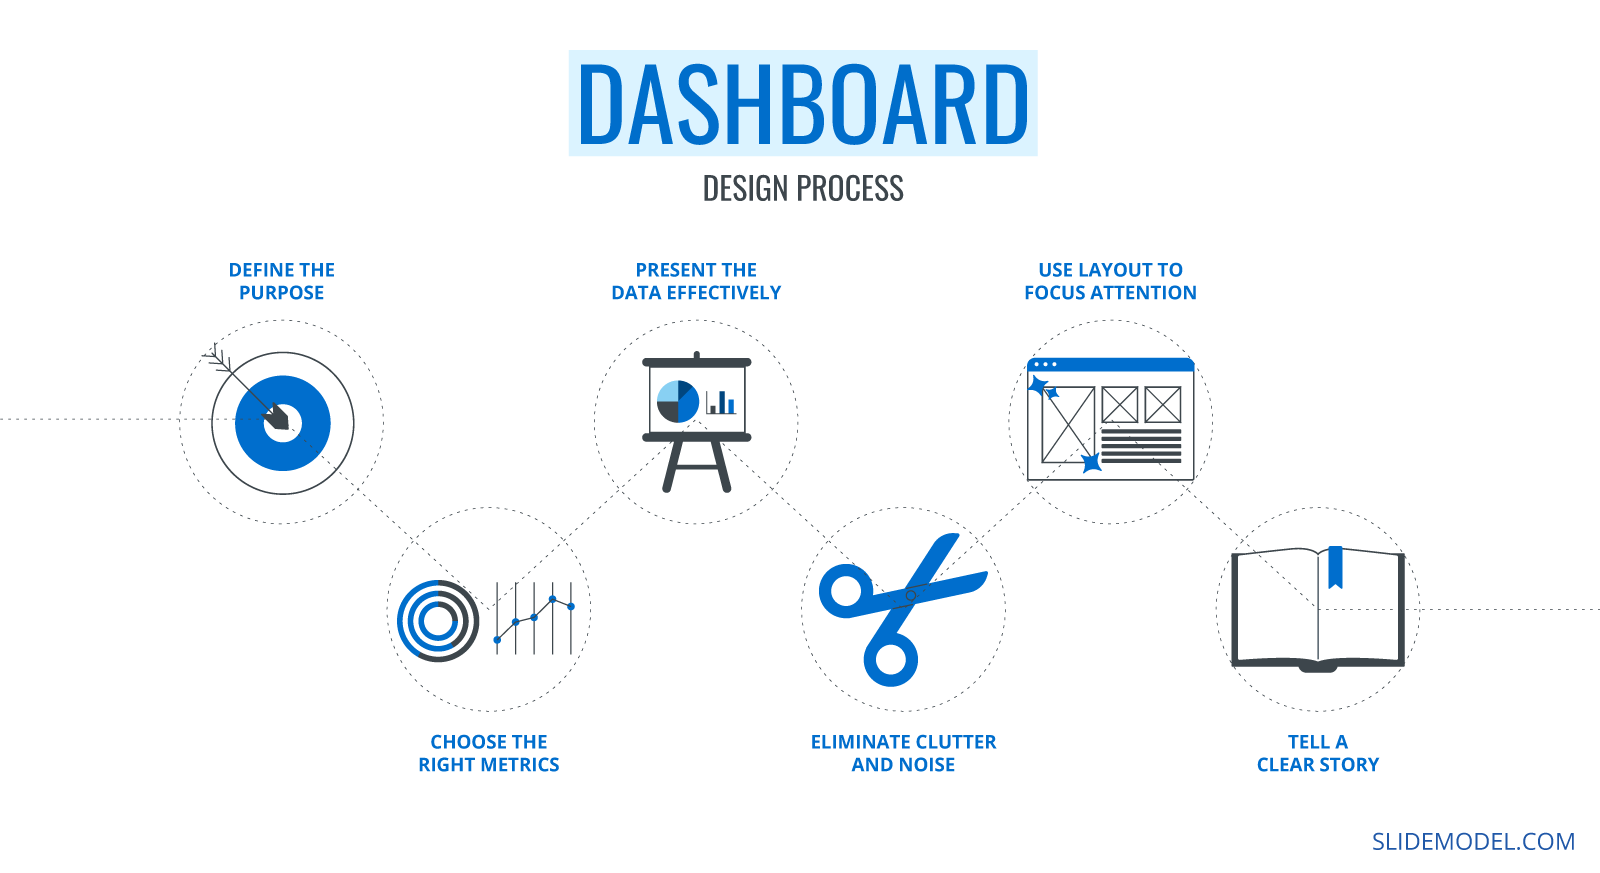 Dashboard Design Process Explained - Infographic by SlideModel